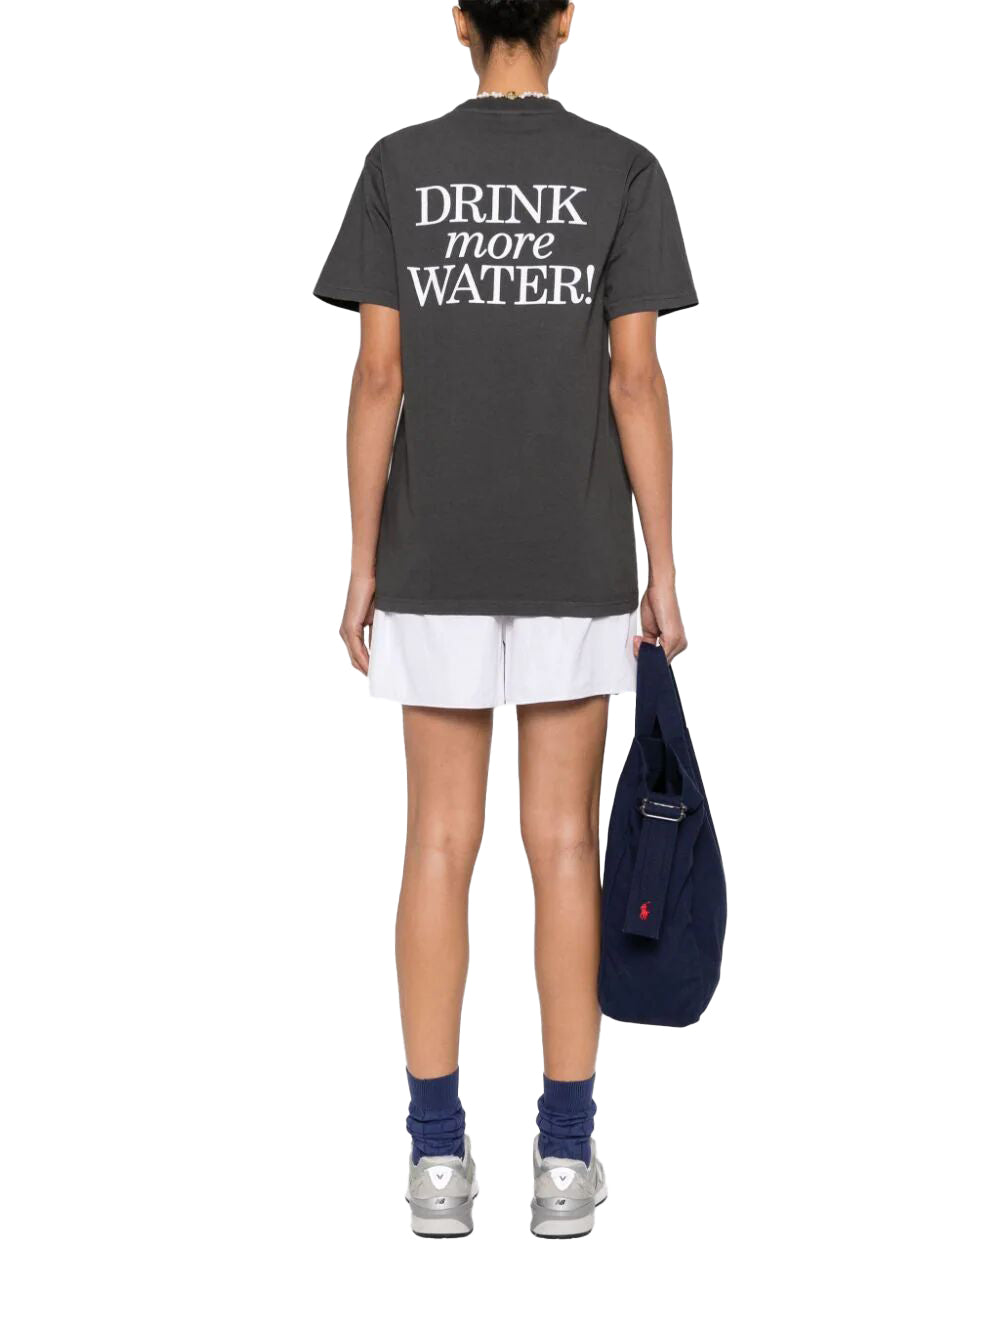 T-shirt New Drink More Water